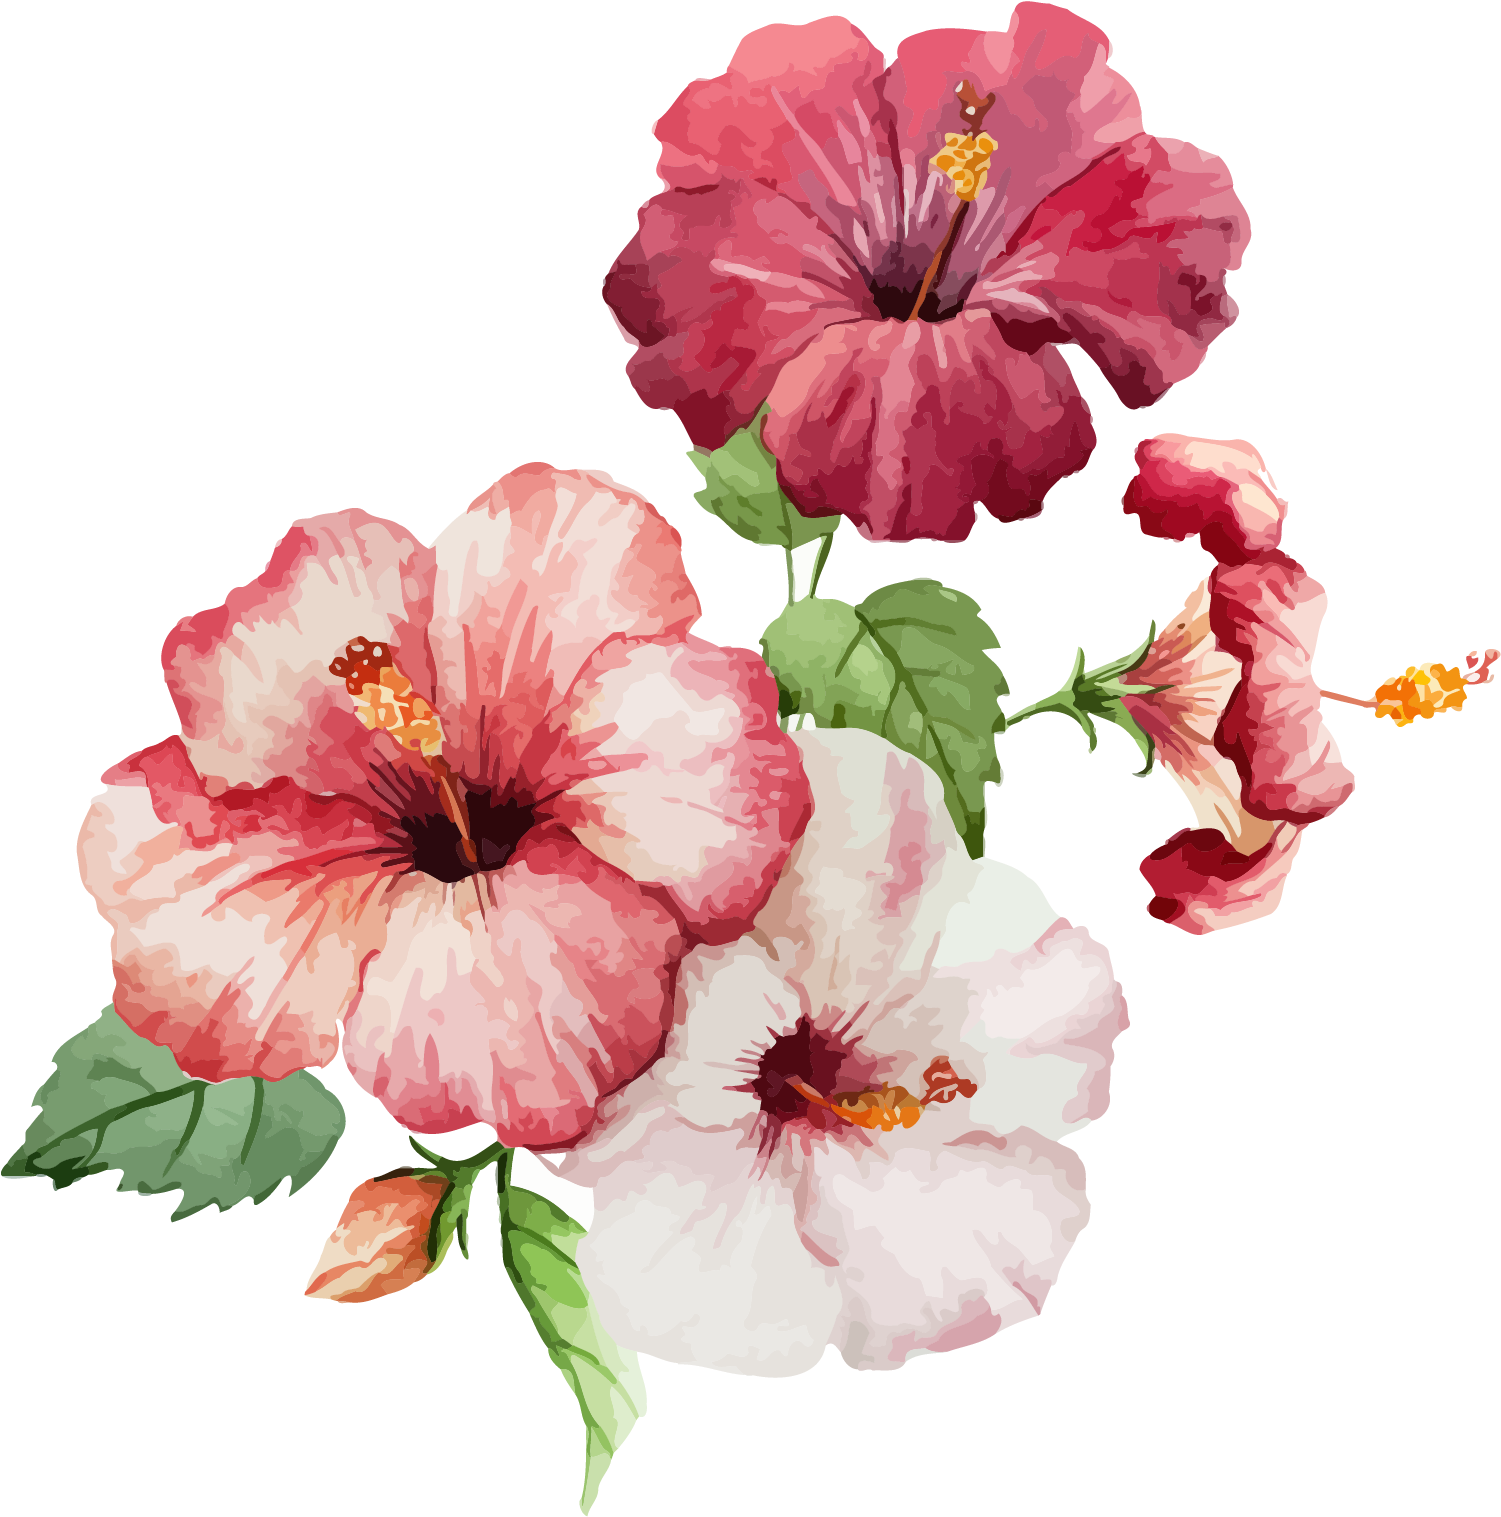 Hibiscus Flower Drawing Watercolor Painting - Cute Tropical Flowers 2017-2018 Monthly Calendar: 17 (1754x1746)